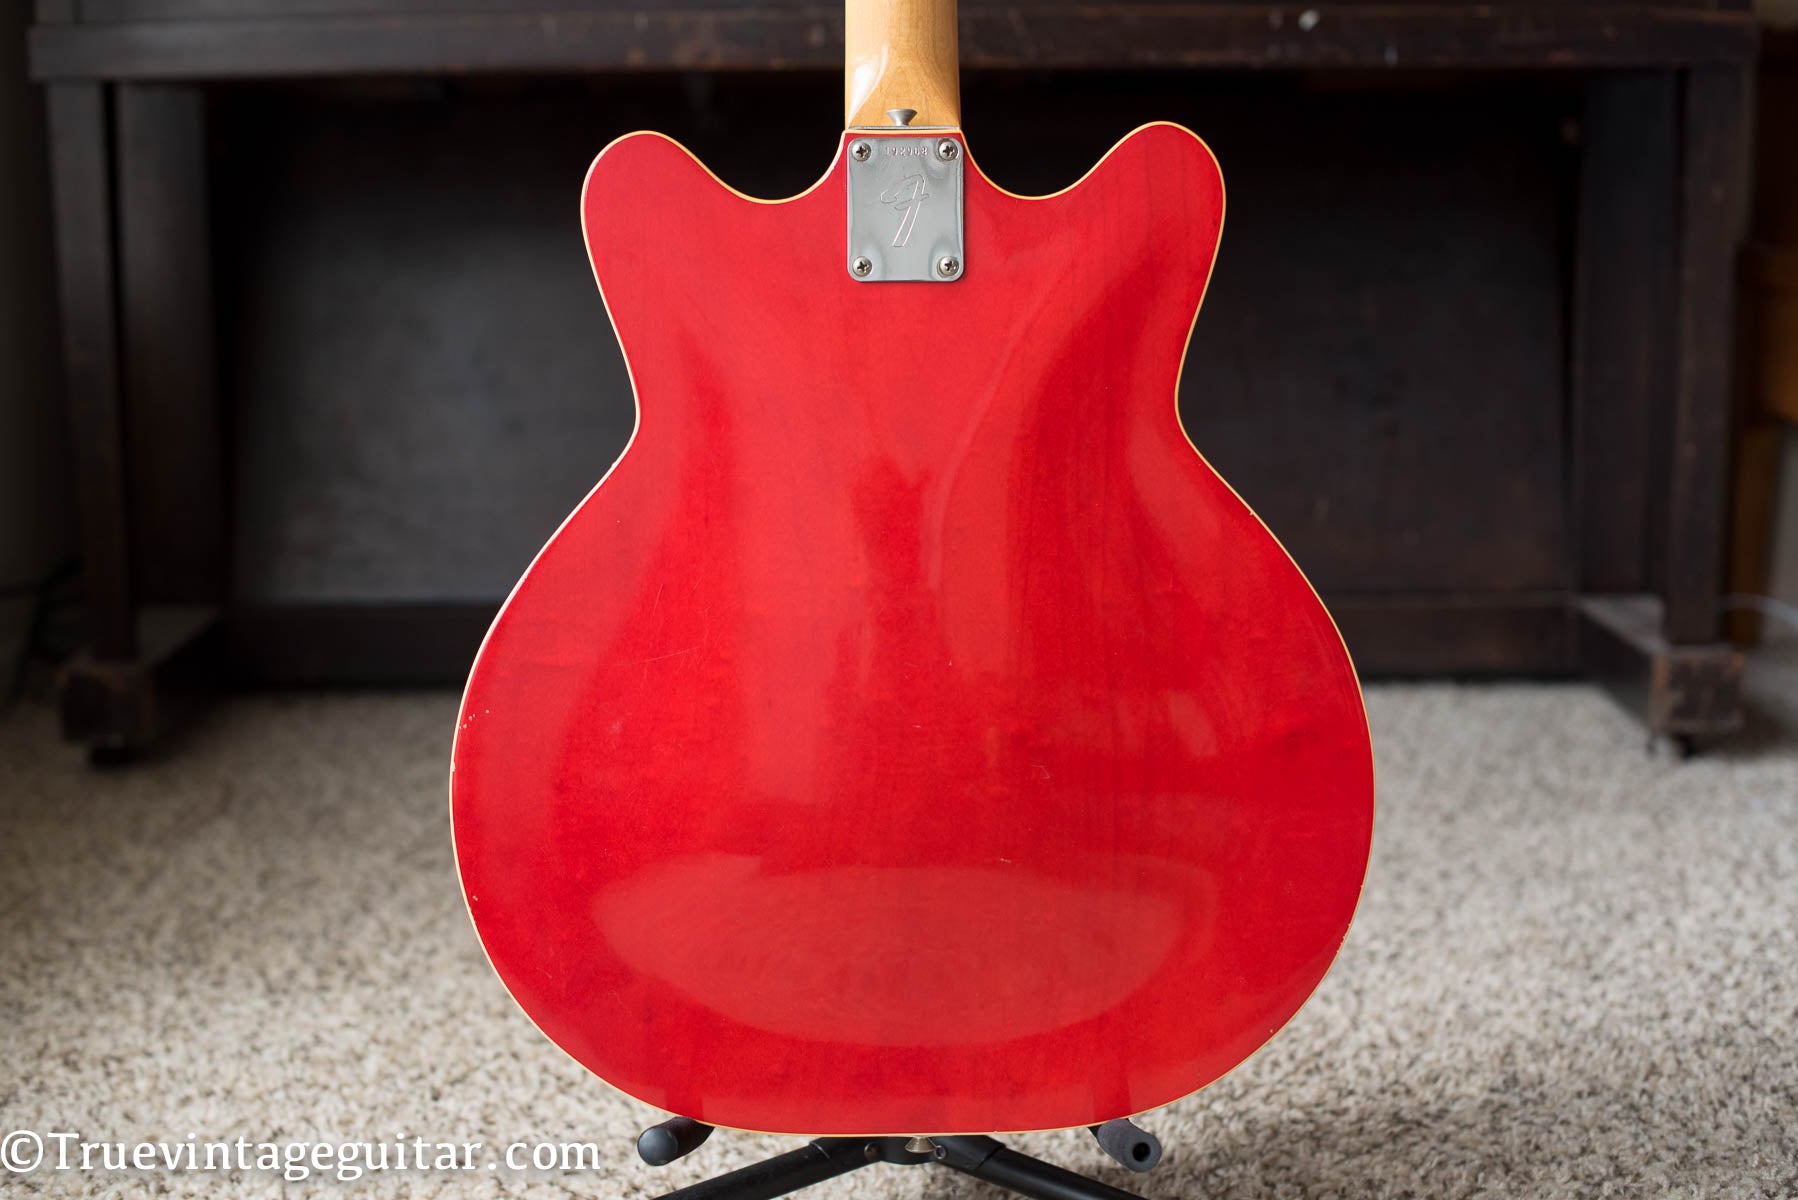 Translucent red finish, 1960s Fender electric guitar